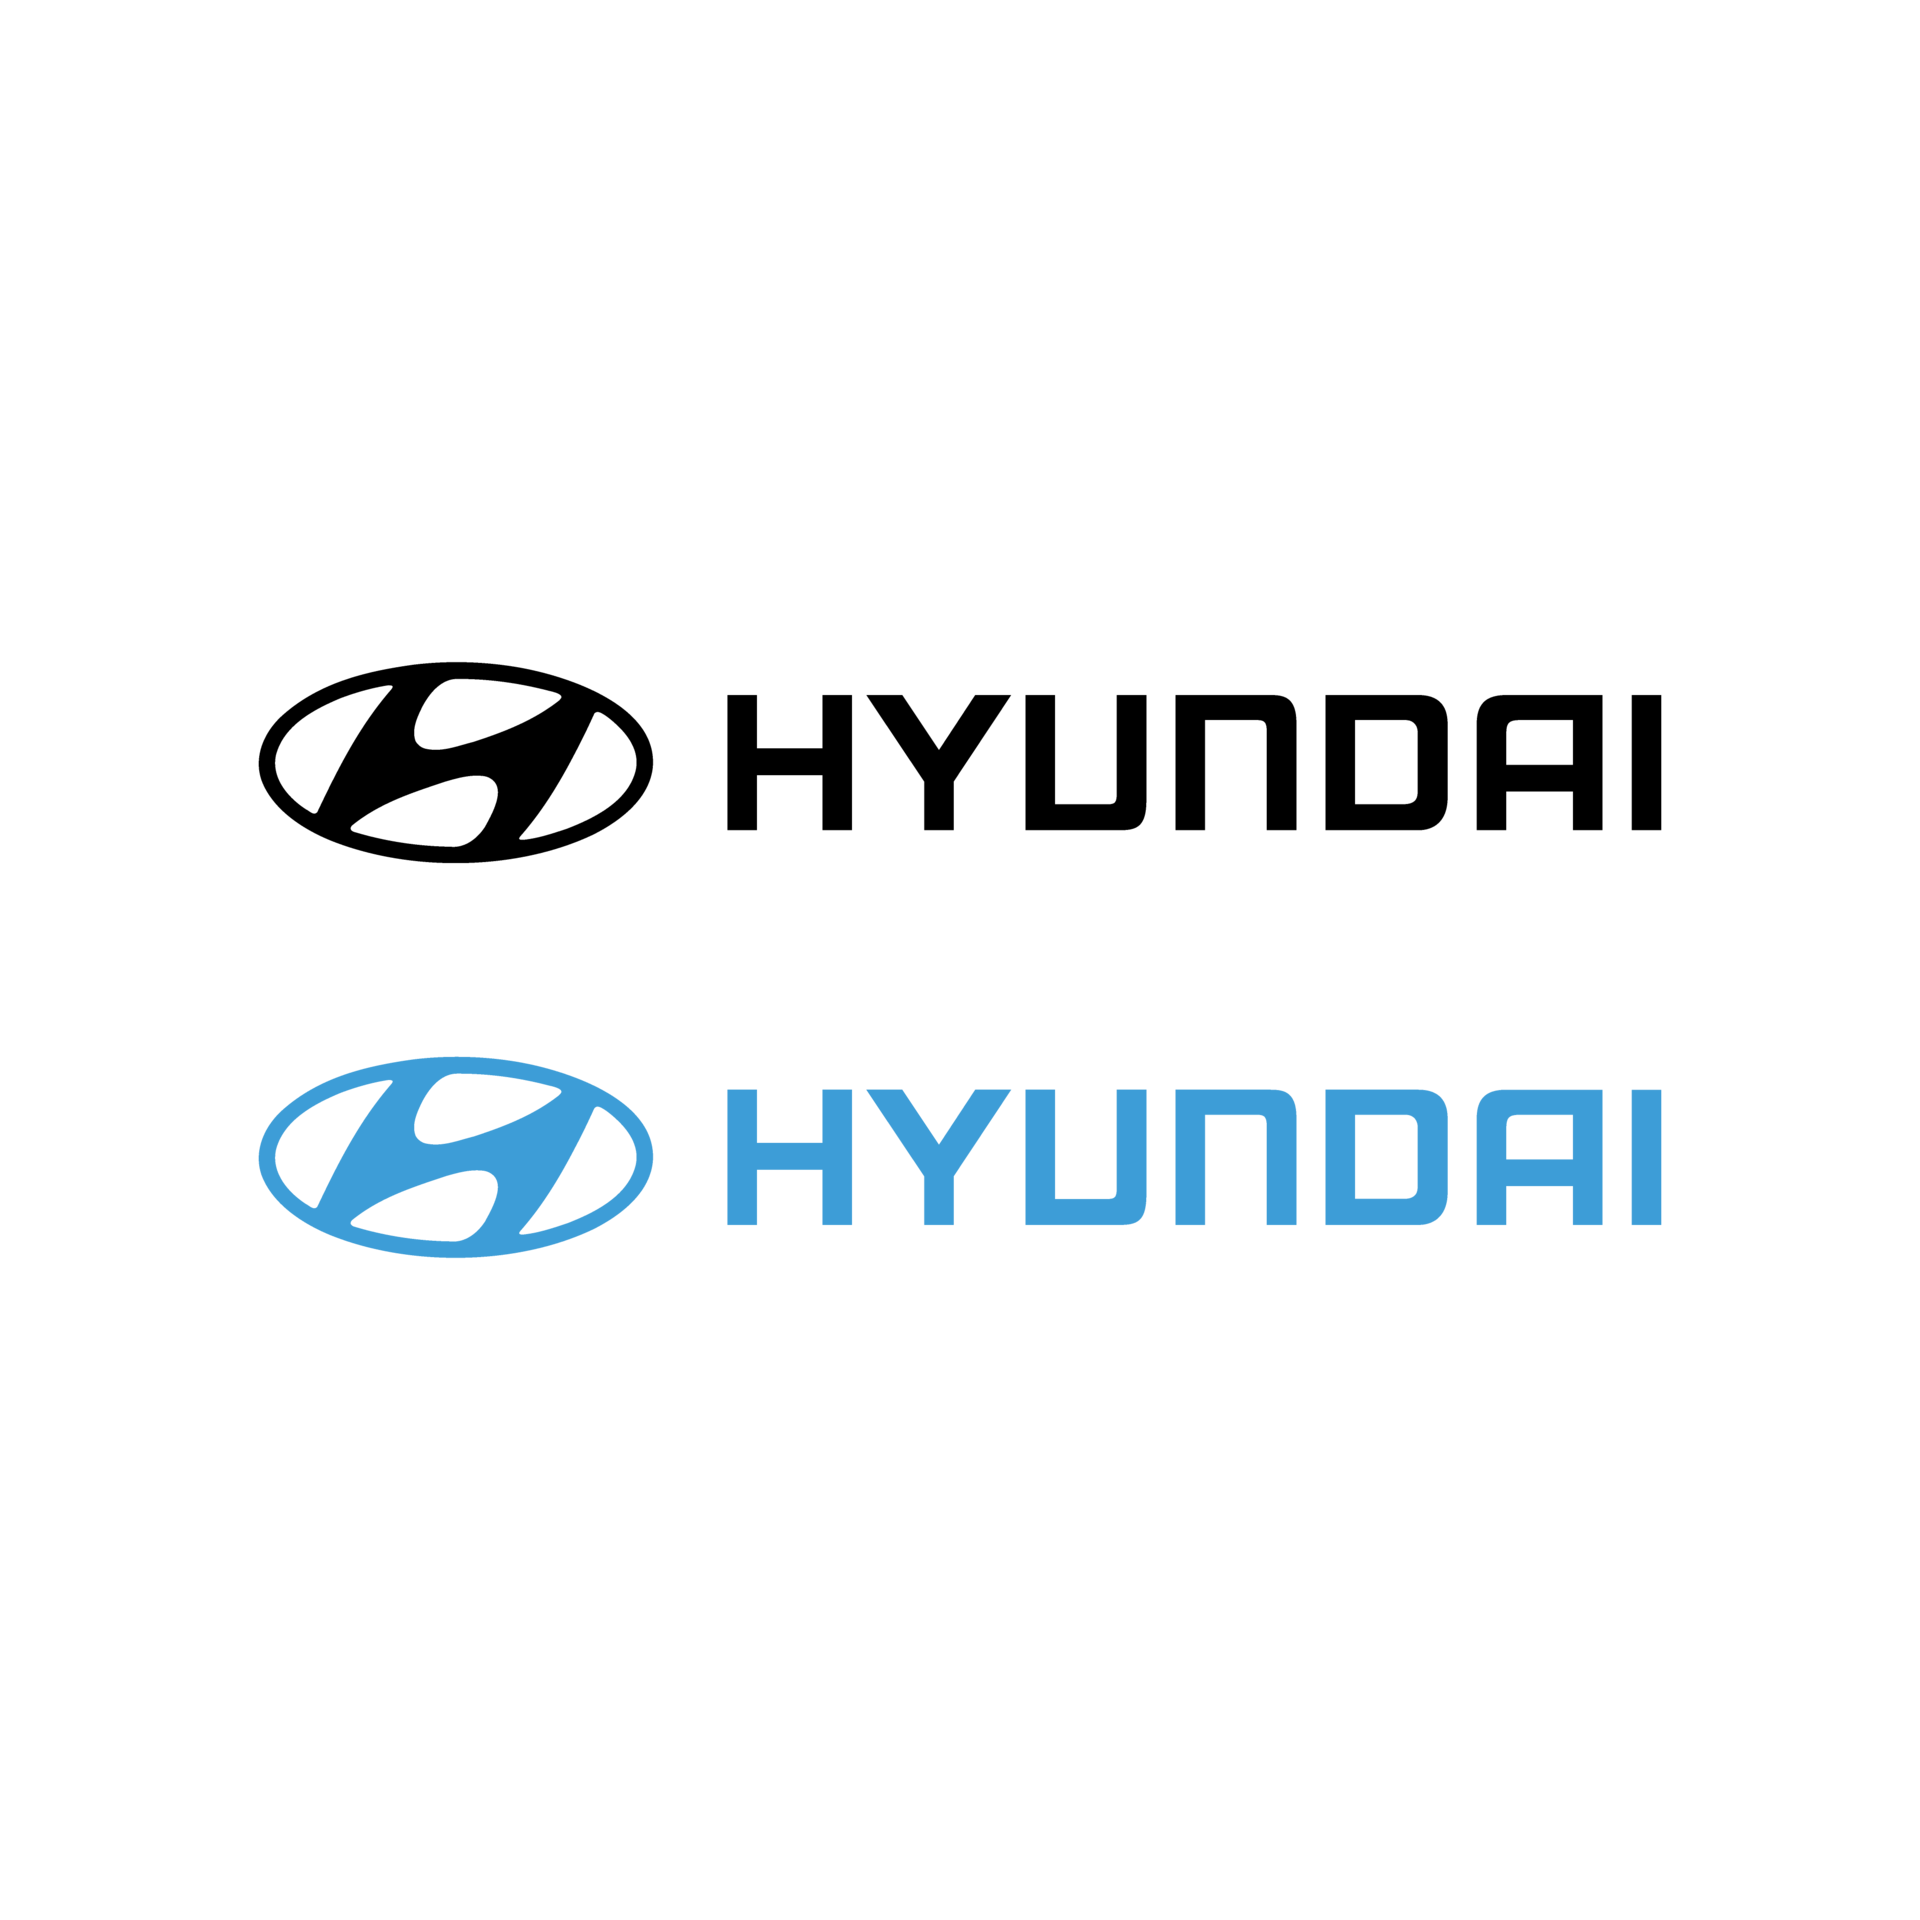 Hyundai stock jumps as much as 10% to highest price since May 2018 after EV  announcement | Fox Business